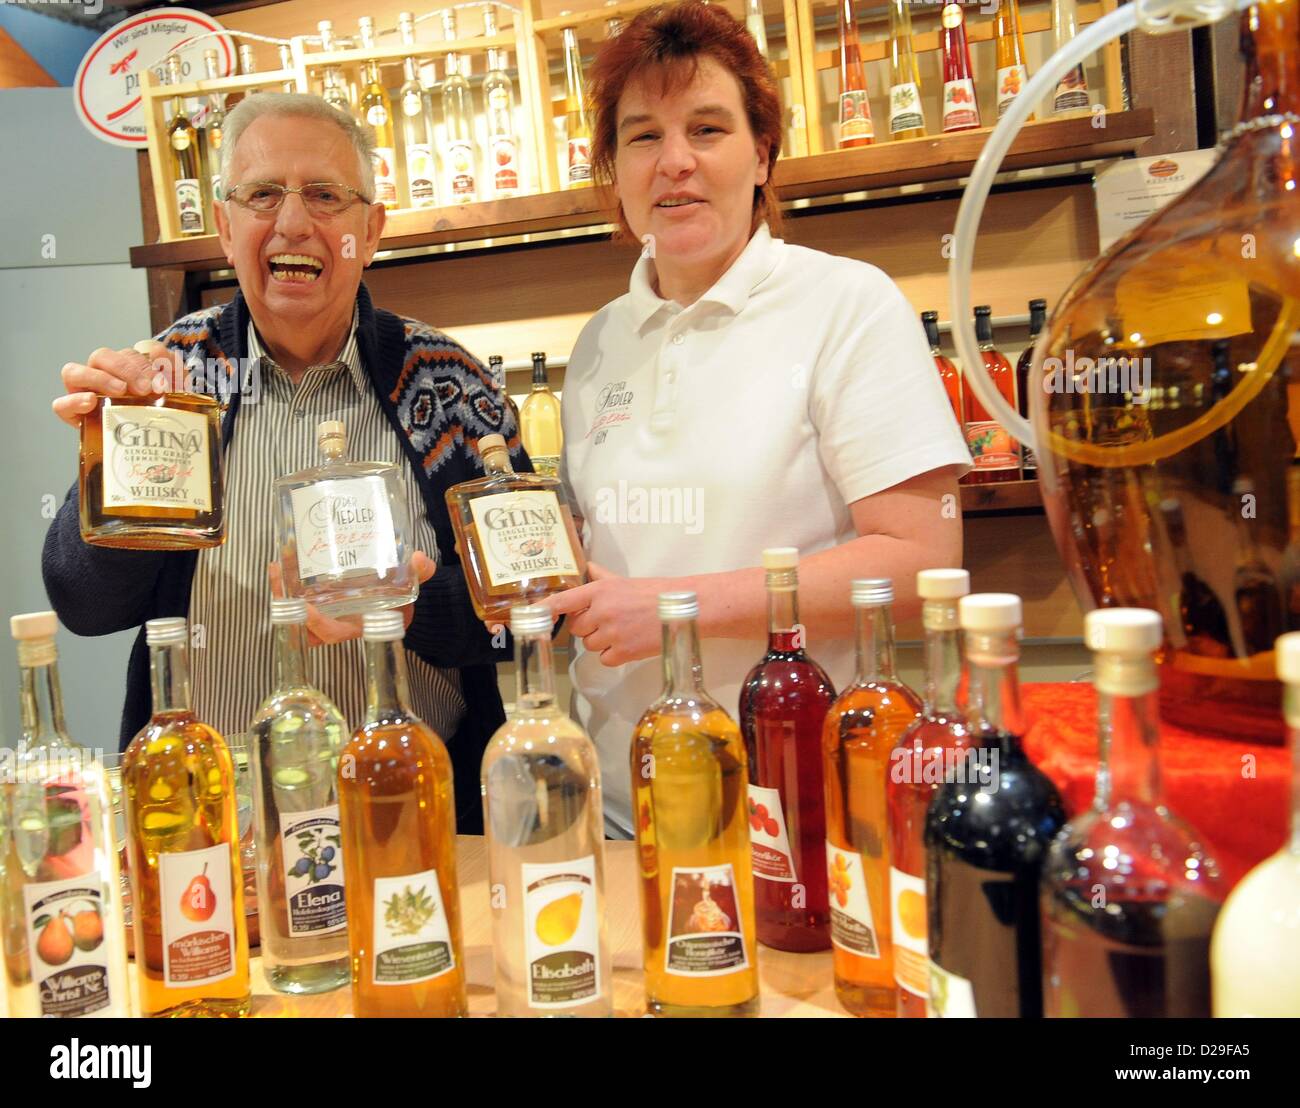 Guenter Schultz and Gritt Dinter from the private distiller Schulz in Werder offer whisky and gin alongside their other fruit brandies at Green Week in Berlin, Germany, 17 January 2013. International Green Week opens its doors to the public from 18 until 27 January 2013. Photo: Bernd Settnik Stock Photo